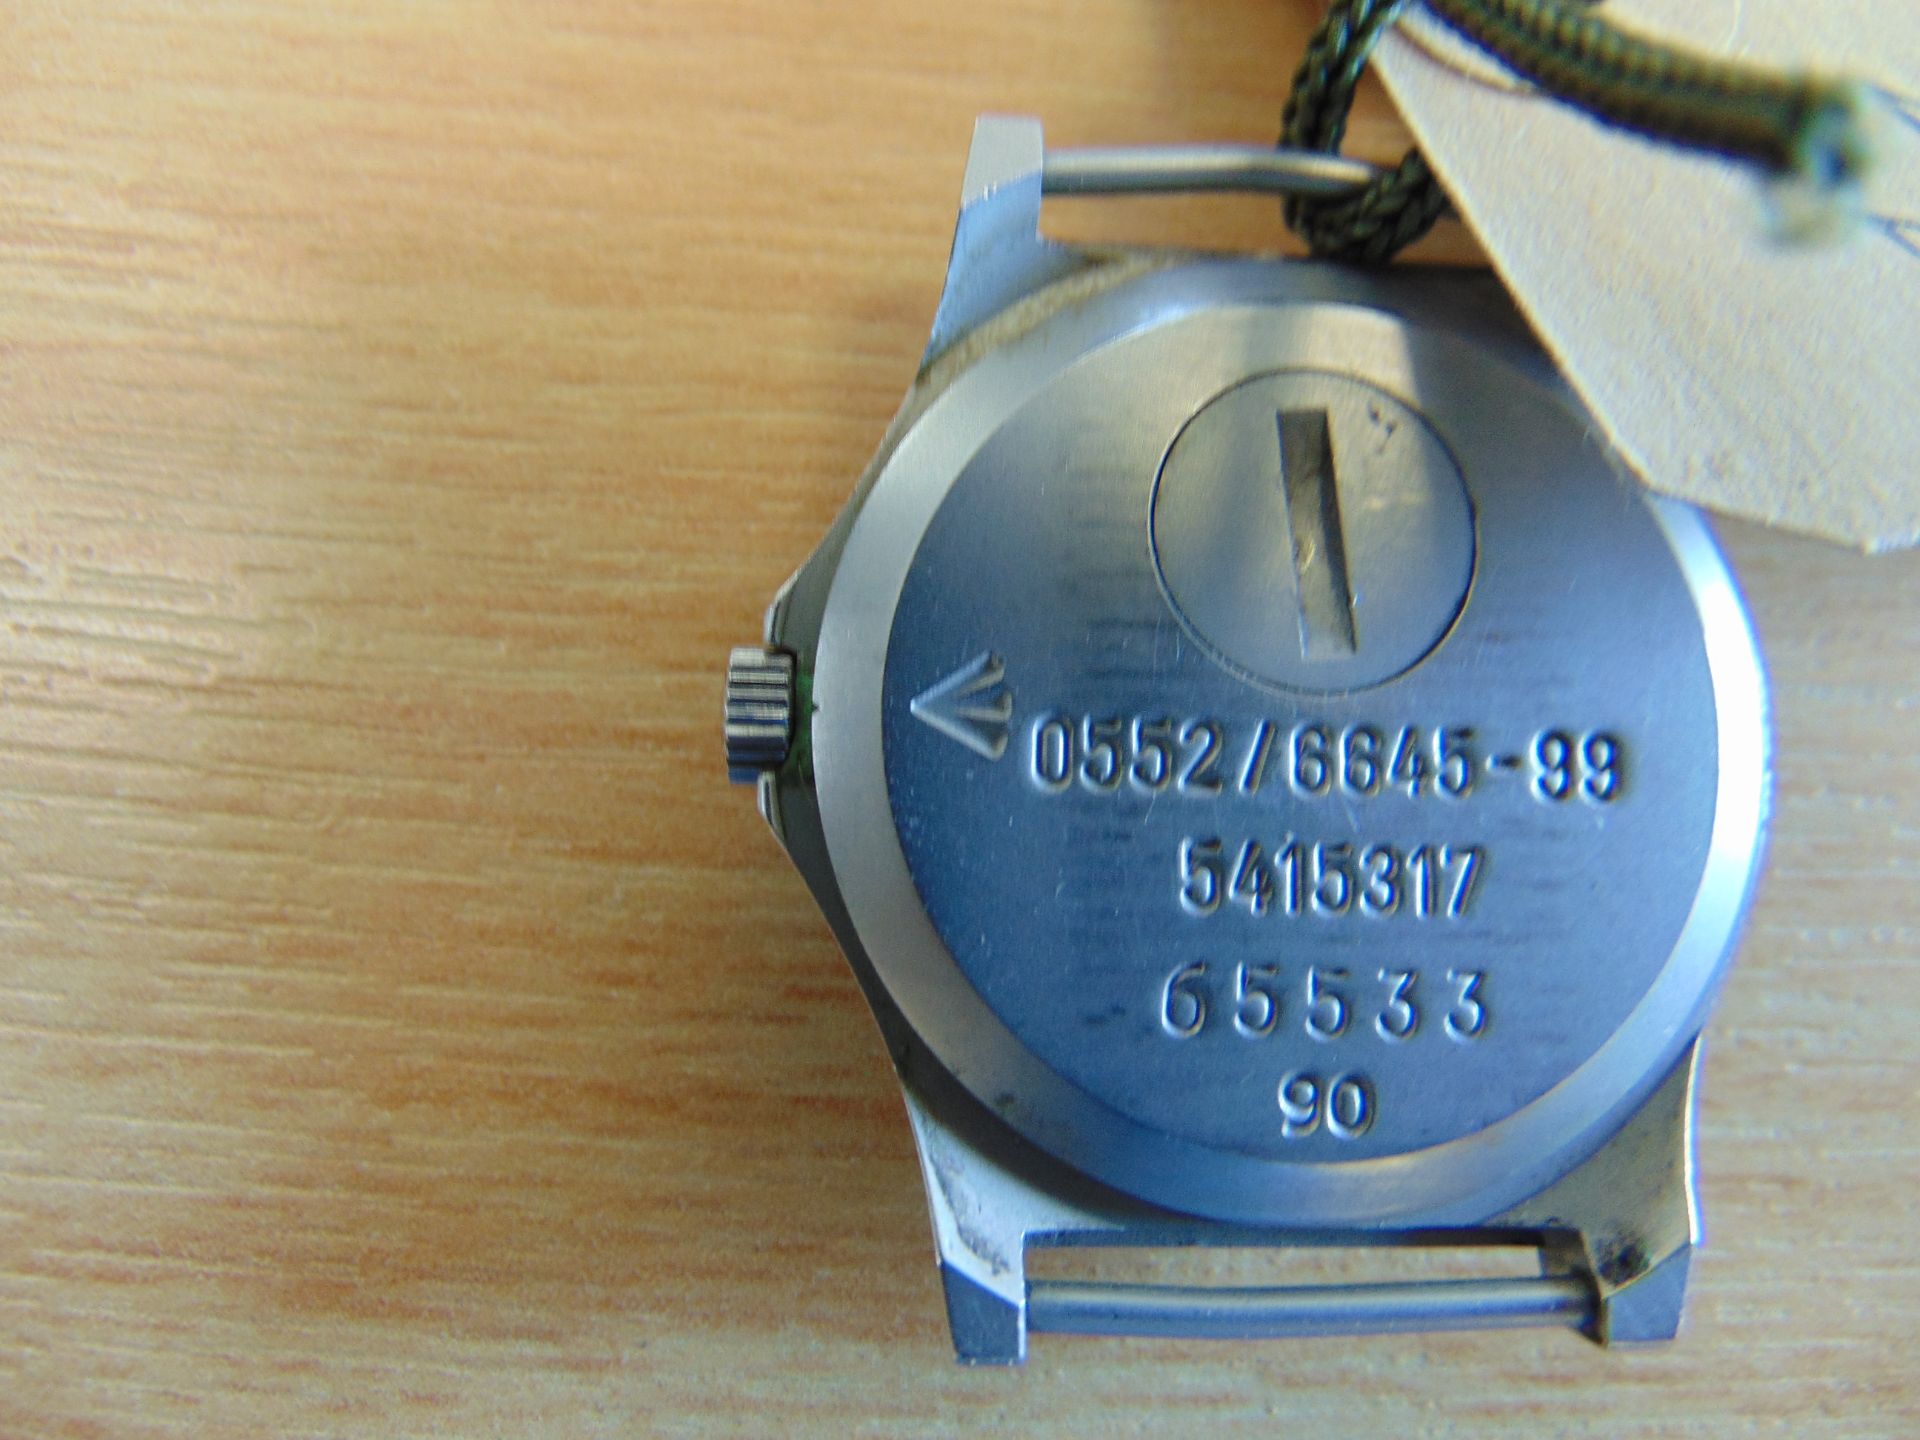 Rare CWC 0552 Royal Marines Issue Service Watch, Nato Markings, Date 1990, GULF WAR 1 - Image 3 of 5